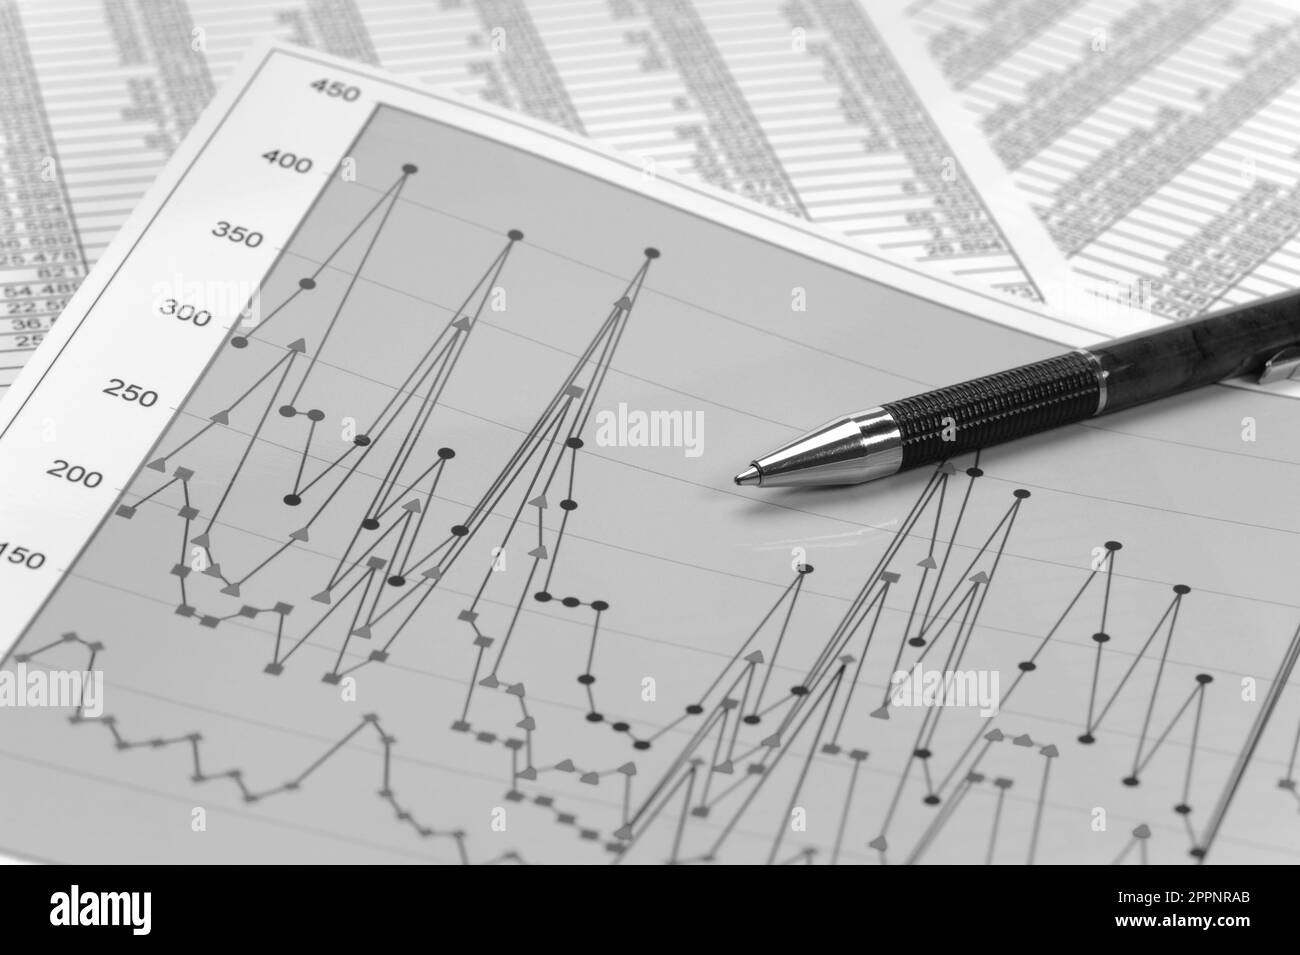 business, finance and economy with chart, calculator and data Stock Photo